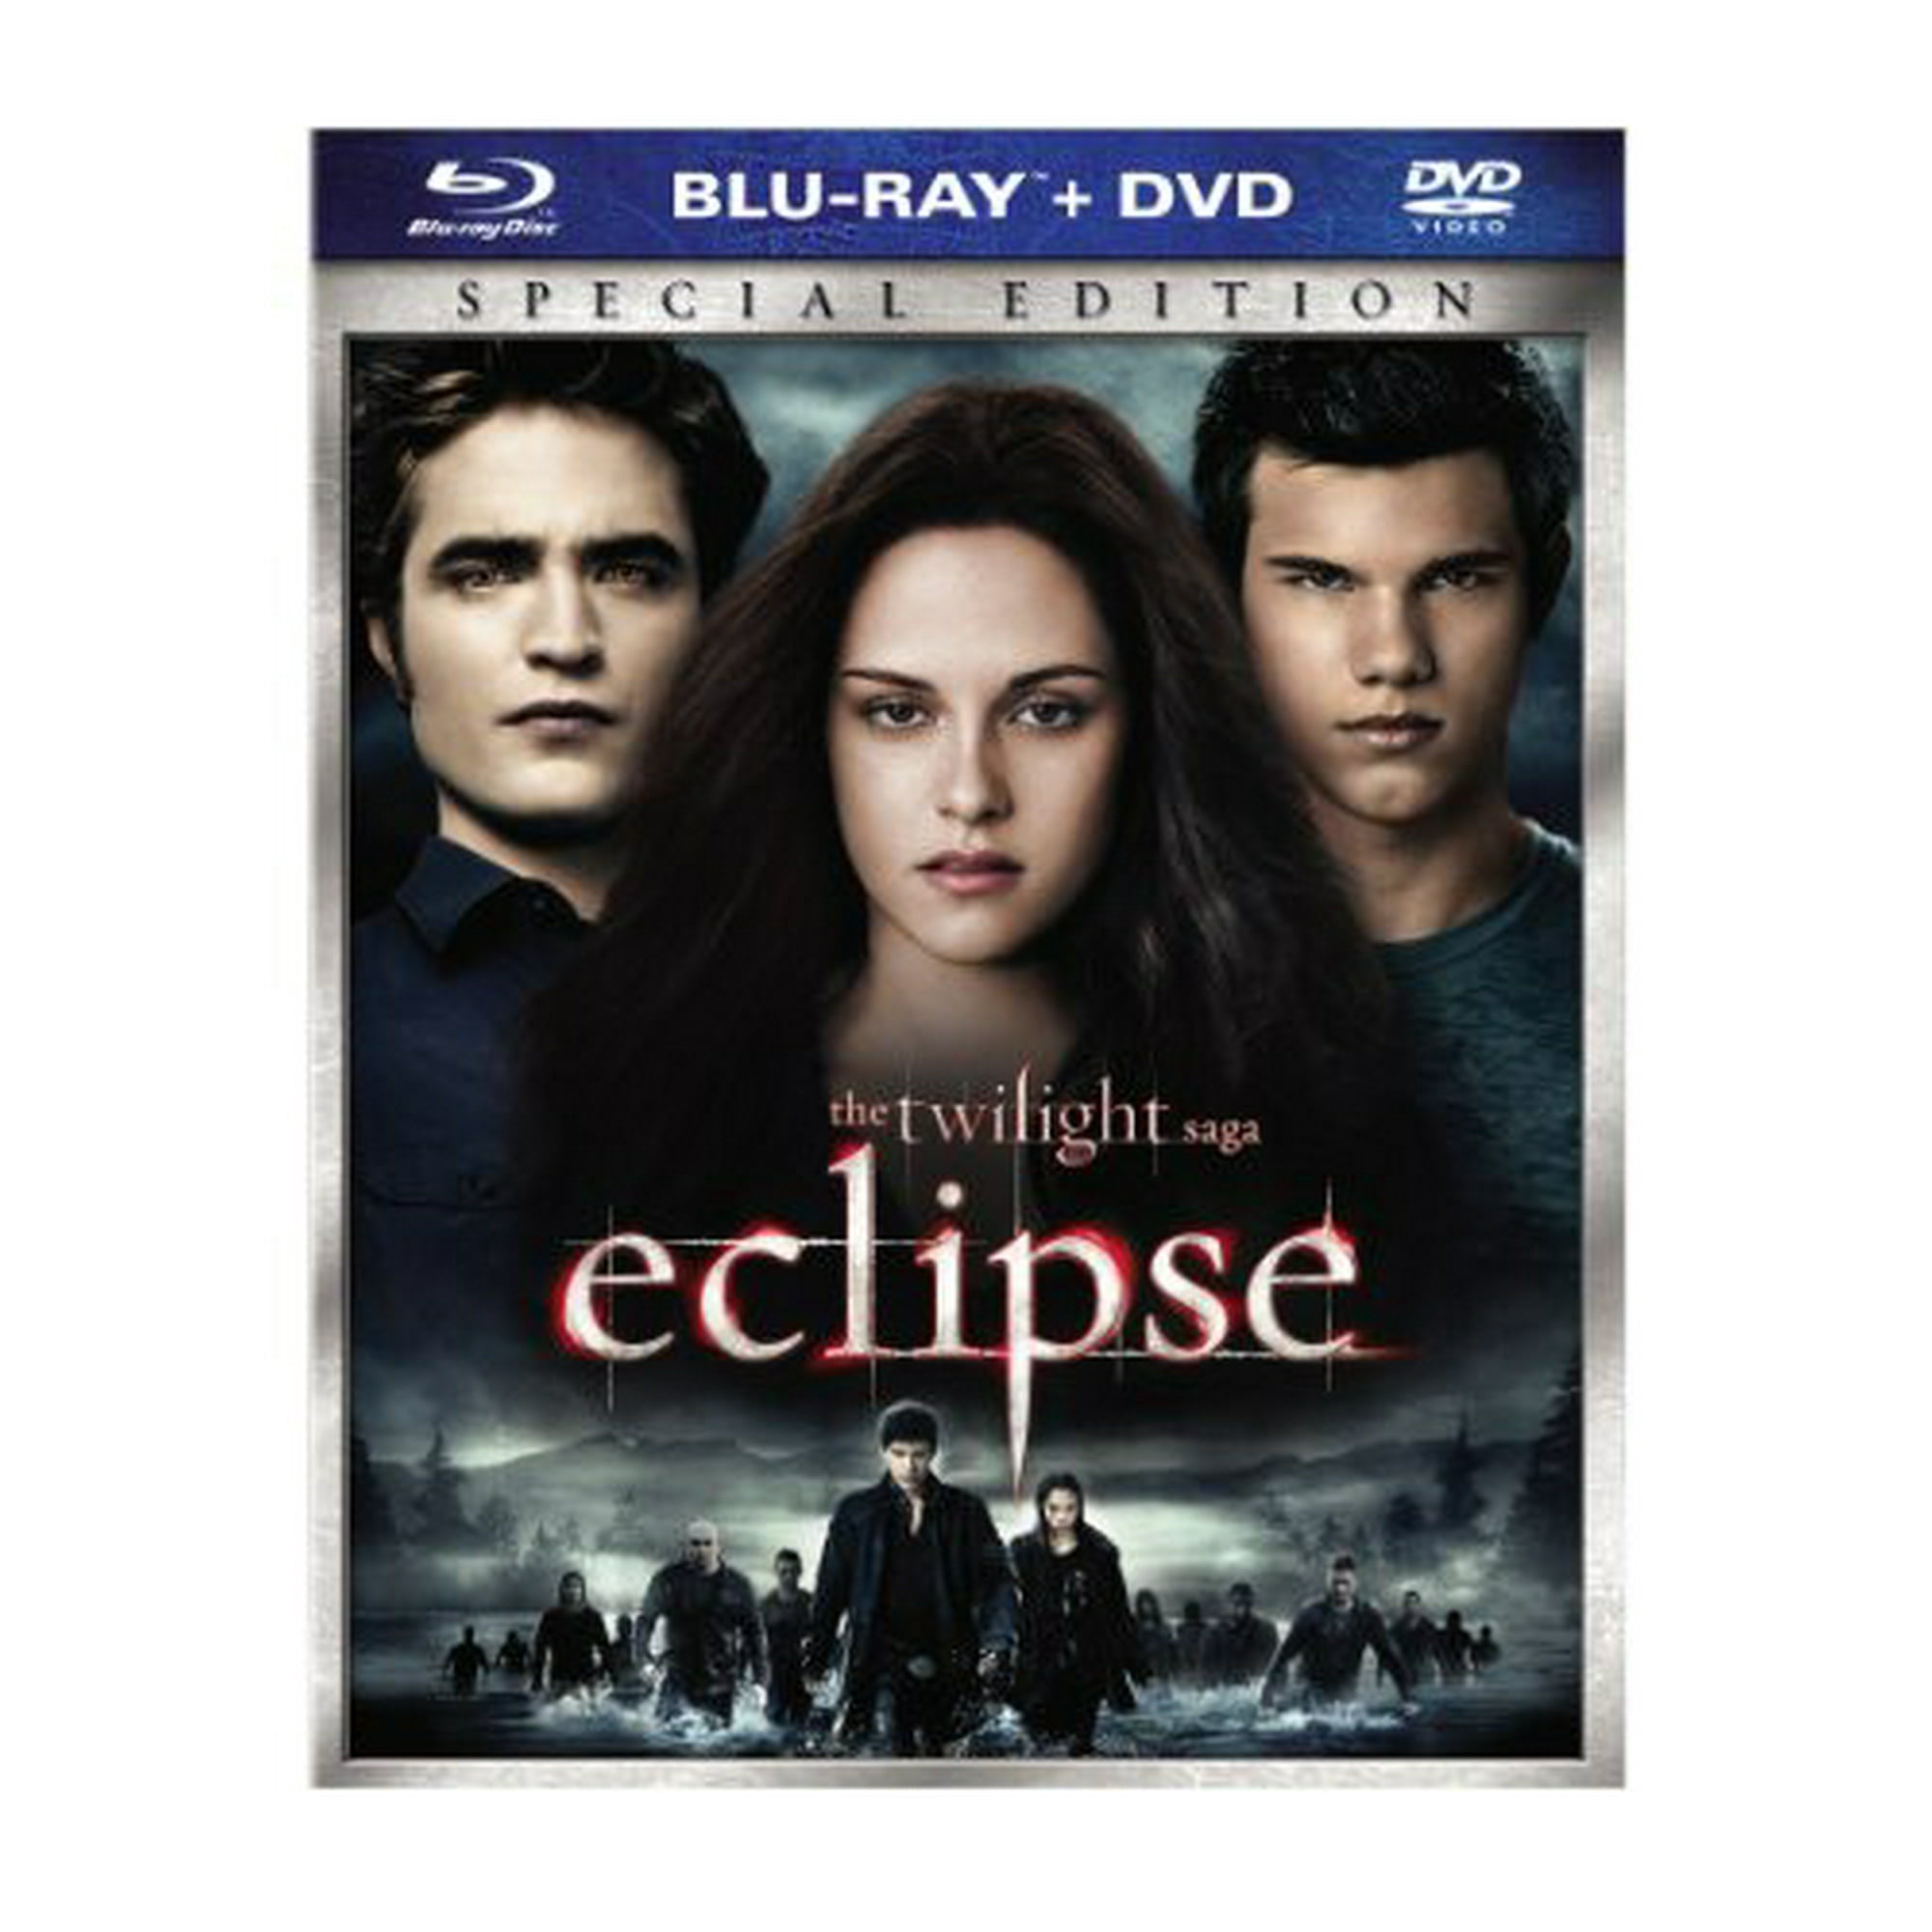 The Twilight Saga: Eclipse [BLU-RAY] With DVD, Special Ed, Subtitled,  Ac-3/Dolby Digital, Dolby, Digital Theater System, Widescreen | Walmart  Canada